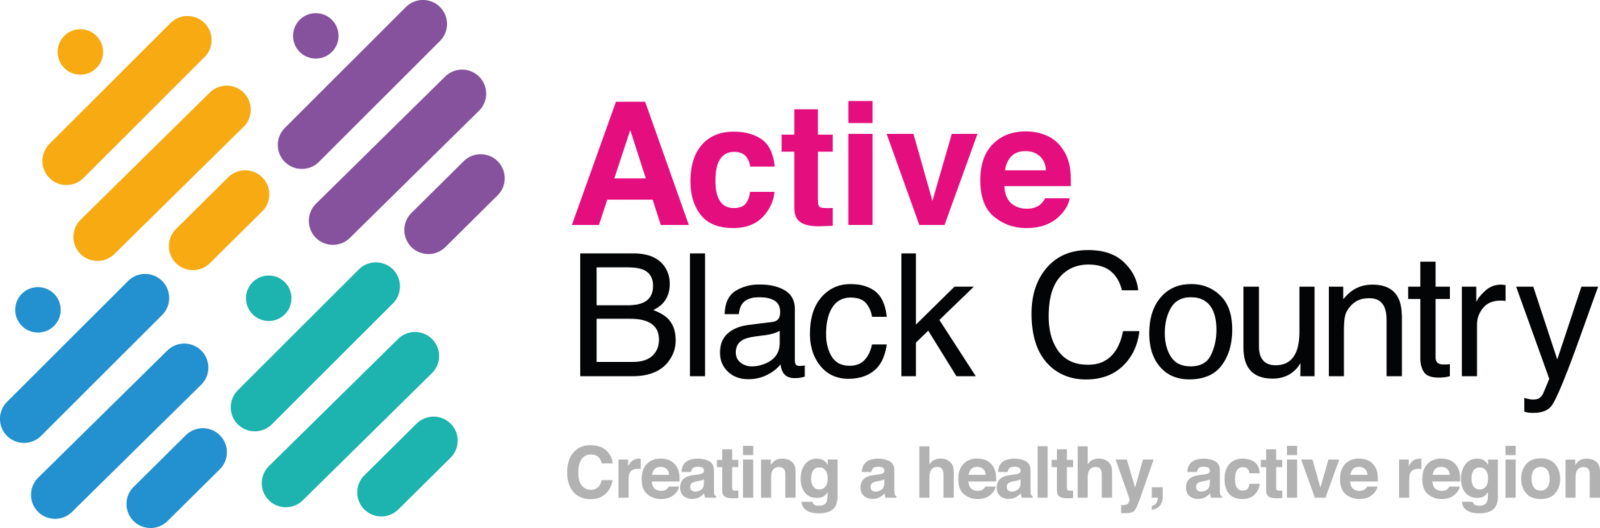 Active Black Country - Covid 19 Local Support - ActiveBlackCountry